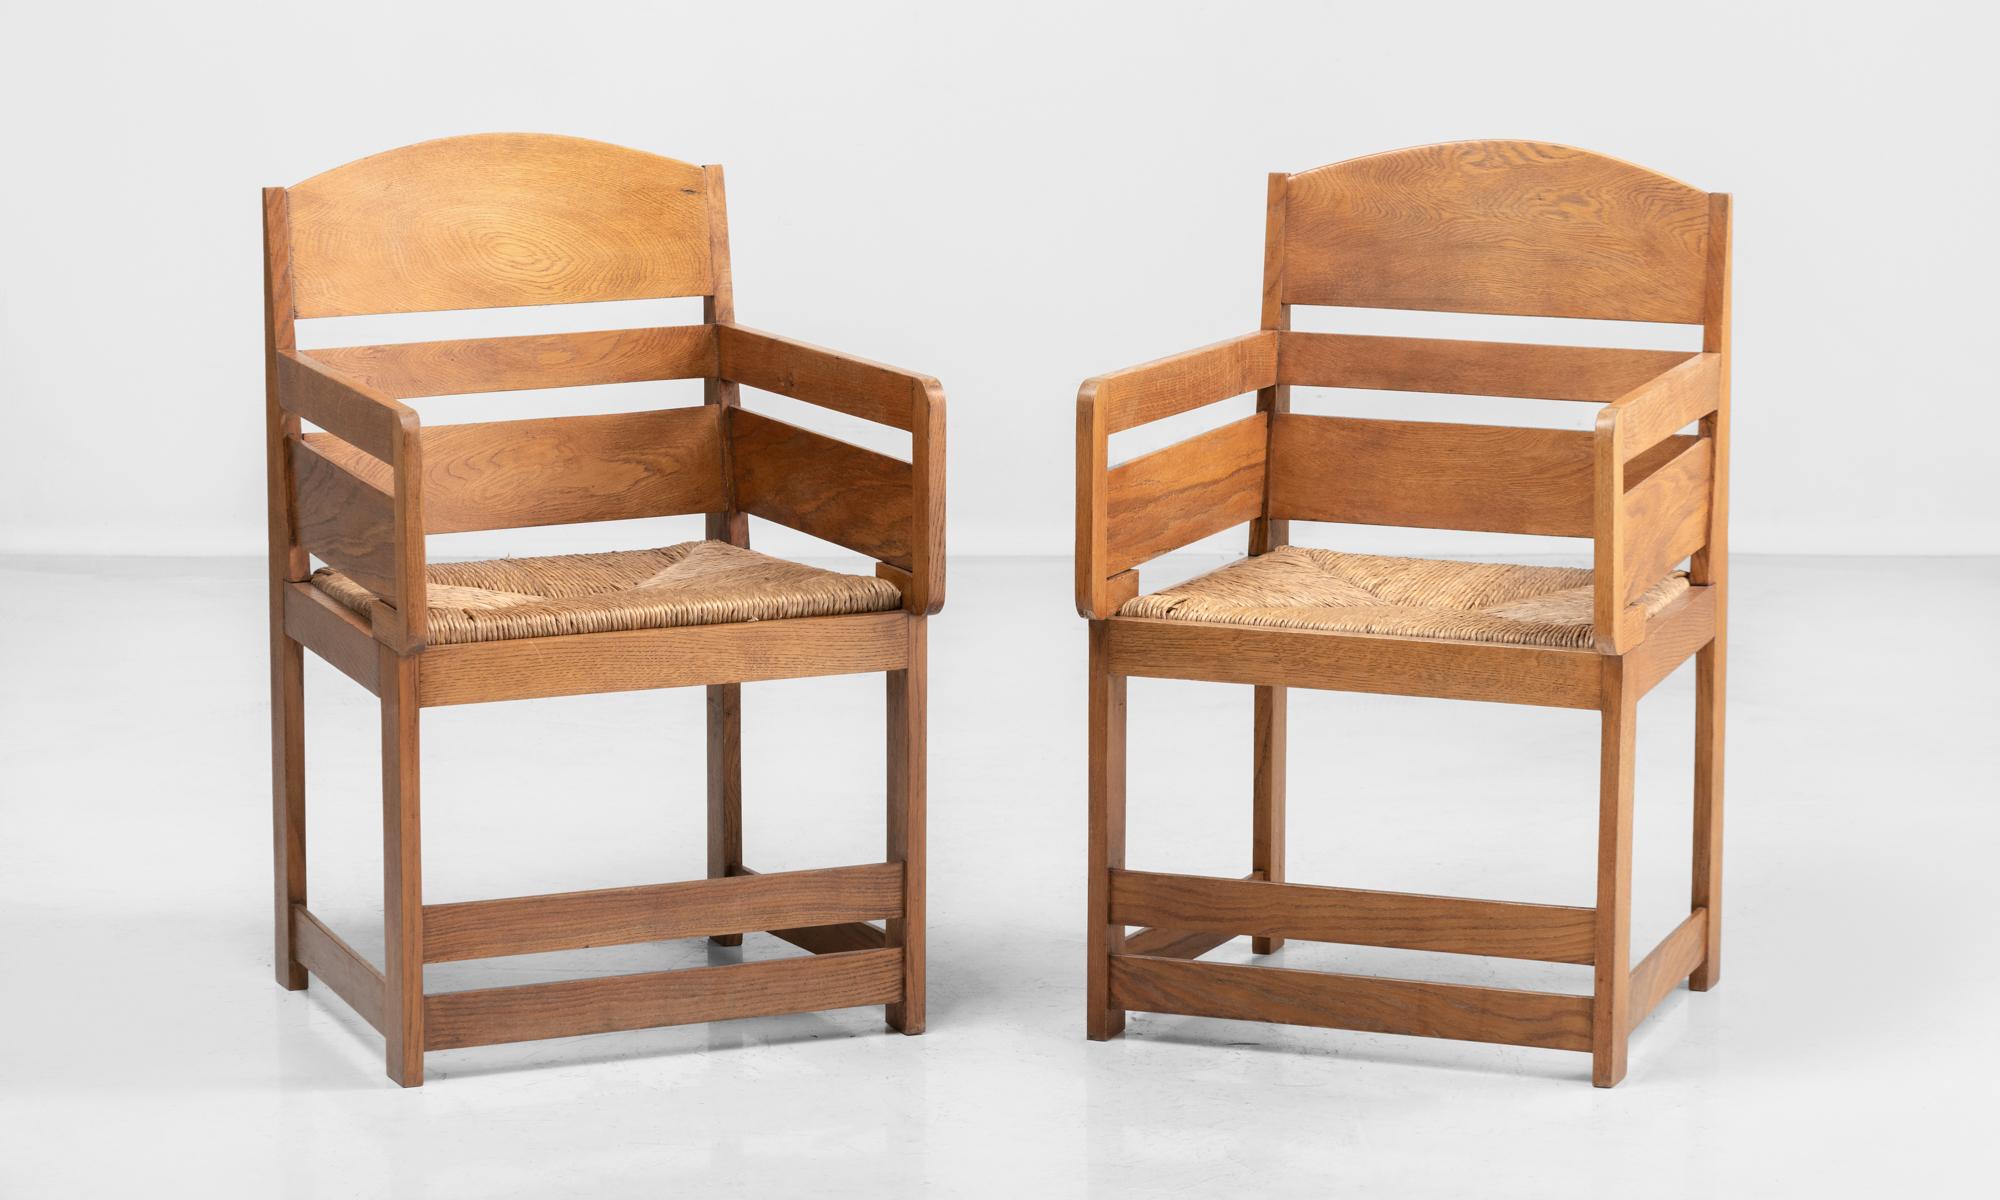 Arts & Crafts oak armchairs, Netherlands, circa 1920.

Arched back with horizontal splats above a rush seat.